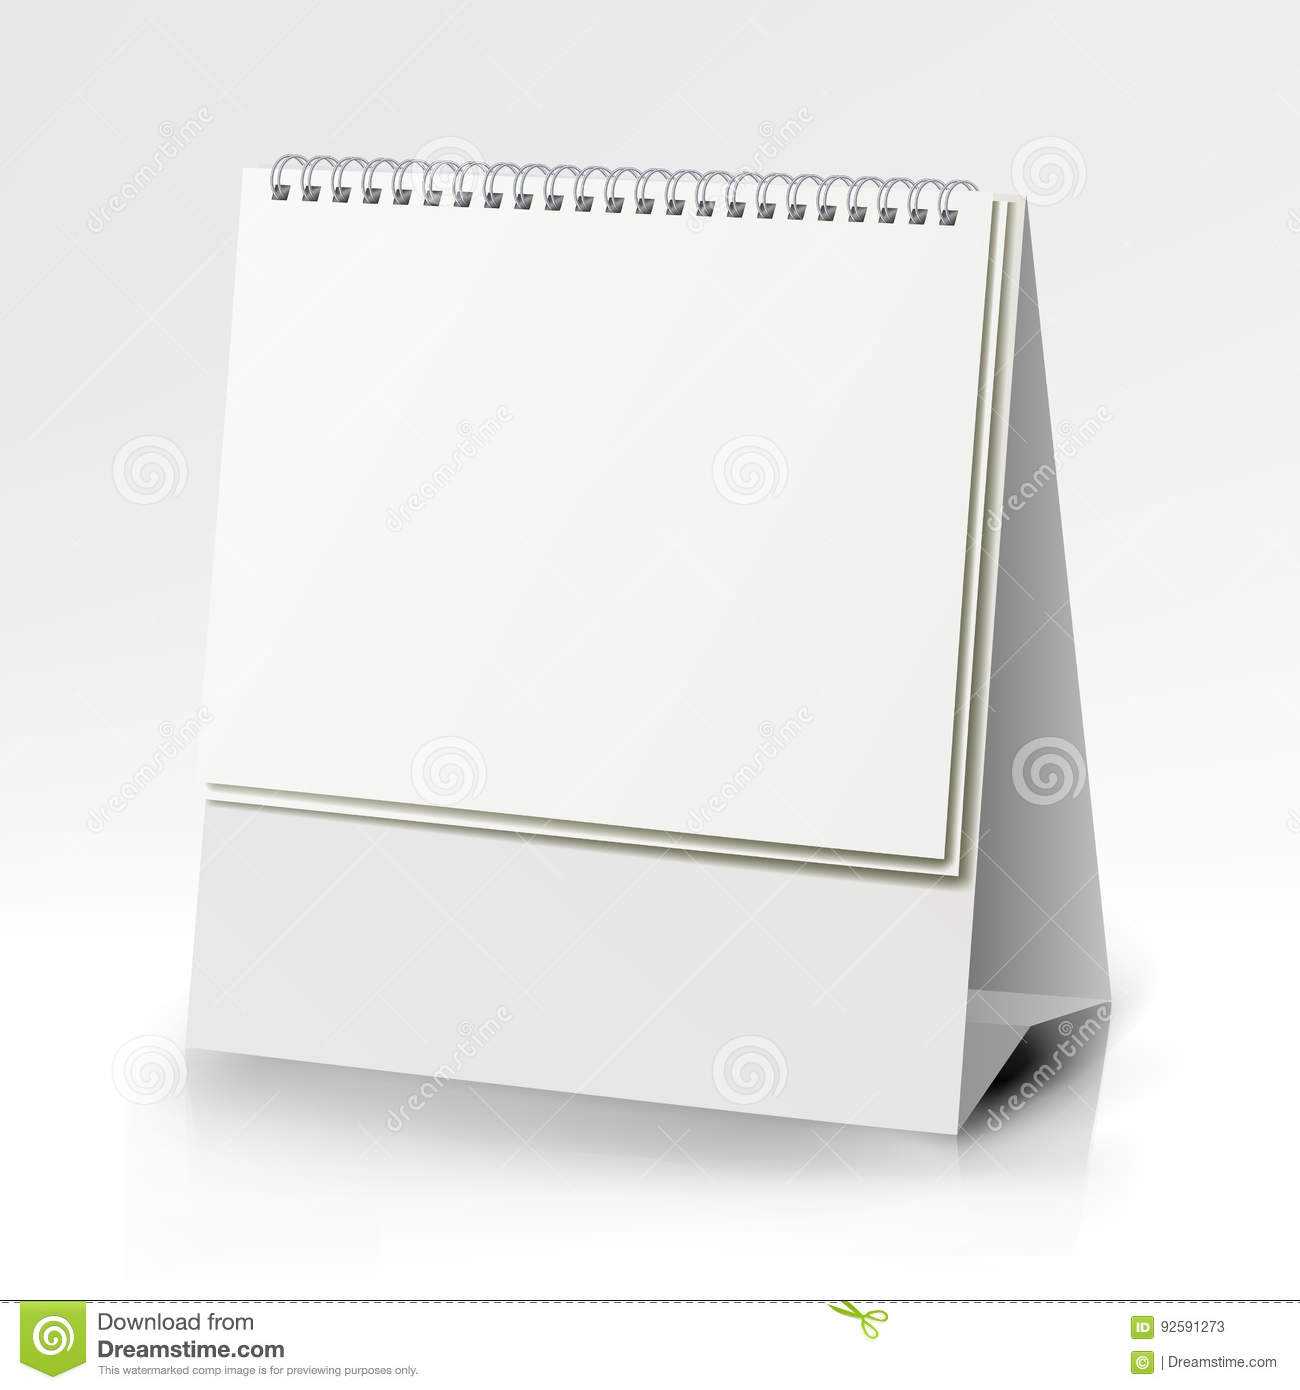 Spiral Calendar Vector. Table Blank Stand Holder For Menu Pertaining To Card Stand Template